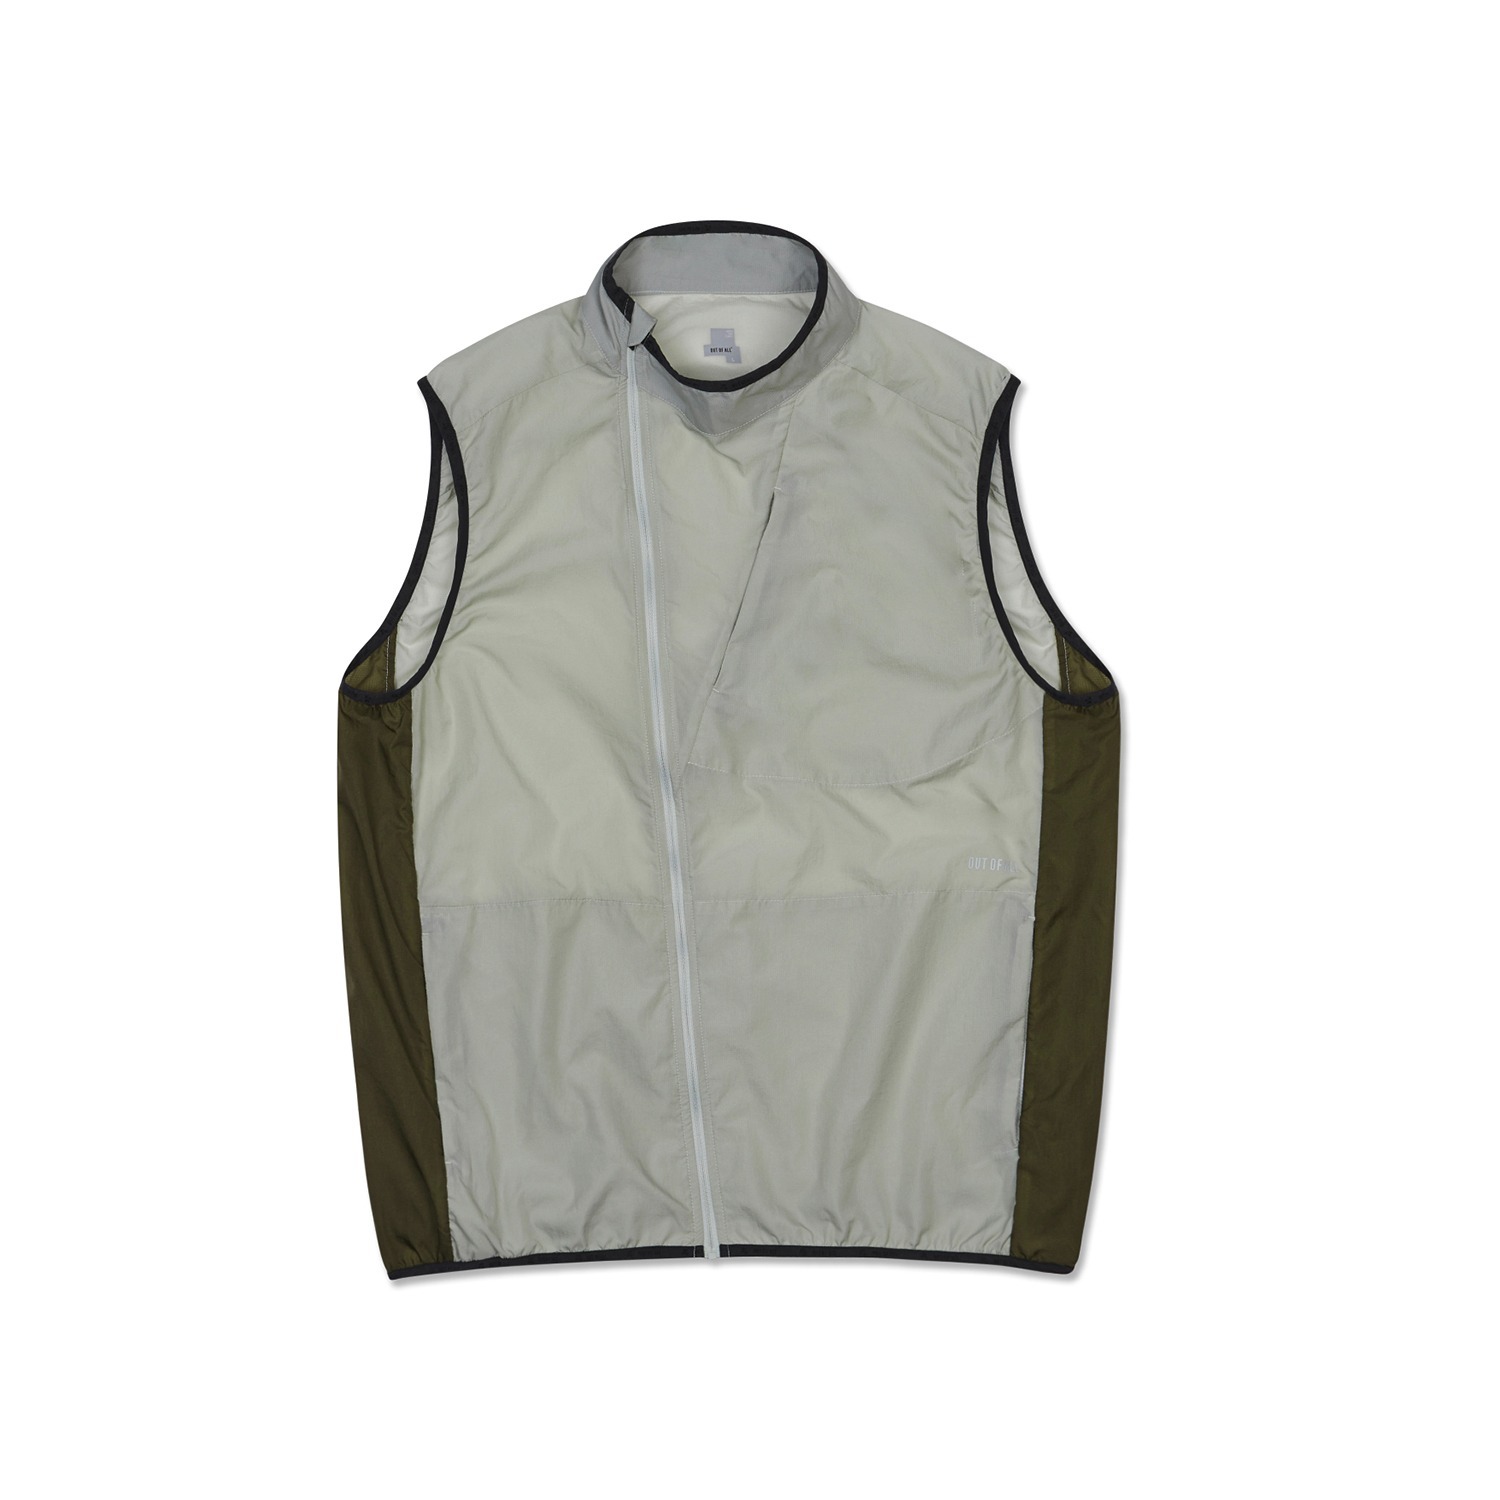 OUT OF ALL LIMONTA PACKABLE WINDSHELL VEST-ZEPHYR BLUE[아웃오브올 리몬타 패커블 윈드쉘 베스트-제퍼 블루]